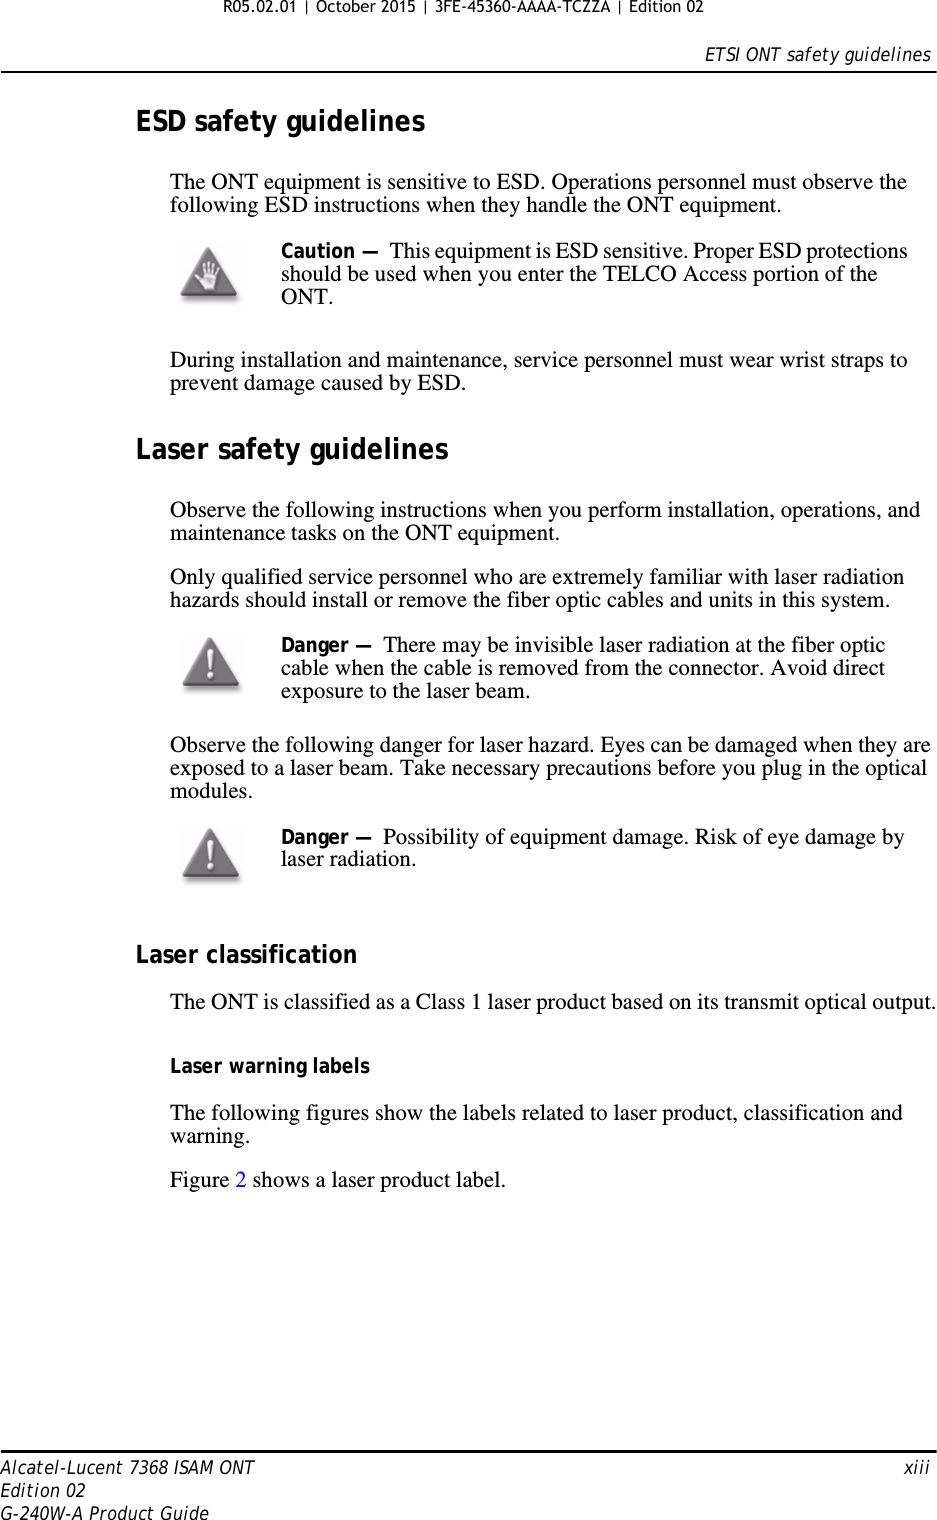 ETSI ONT safety guidelinesAlcatel-Lucent 7368 ISAM ONT   xiiiEdition 02G-240W-A Product GuideESD safety guidelinesThe ONT equipment is sensitive to ESD. Operations personnel must observe the following ESD instructions when they handle the ONT equipment. During installation and maintenance, service personnel must wear wrist straps to prevent damage caused by ESD.Laser safety guidelinesObserve the following instructions when you perform installation, operations, and maintenance tasks on the ONT equipment.Only qualified service personnel who are extremely familiar with laser radiation hazards should install or remove the fiber optic cables and units in this system.Observe the following danger for laser hazard. Eyes can be damaged when they are exposed to a laser beam. Take necessary precautions before you plug in the optical modules.Laser classificationThe ONT is classified as a Class 1 laser product based on its transmit optical output.Laser warning labelsThe following figures show the labels related to laser product, classification and warning. Figure 2 shows a laser product label.Caution —  This equipment is ESD sensitive. Proper ESD protections should be used when you enter the TELCO Access portion of the ONT.Danger —  There may be invisible laser radiation at the fiber optic cable when the cable is removed from the connector. Avoid direct exposure to the laser beam.Danger —  Possibility of equipment damage. Risk of eye damage by laser radiation. R05.02.01 | October 2015 | 3FE-45360-AAAA-TCZZA | Edition 02 